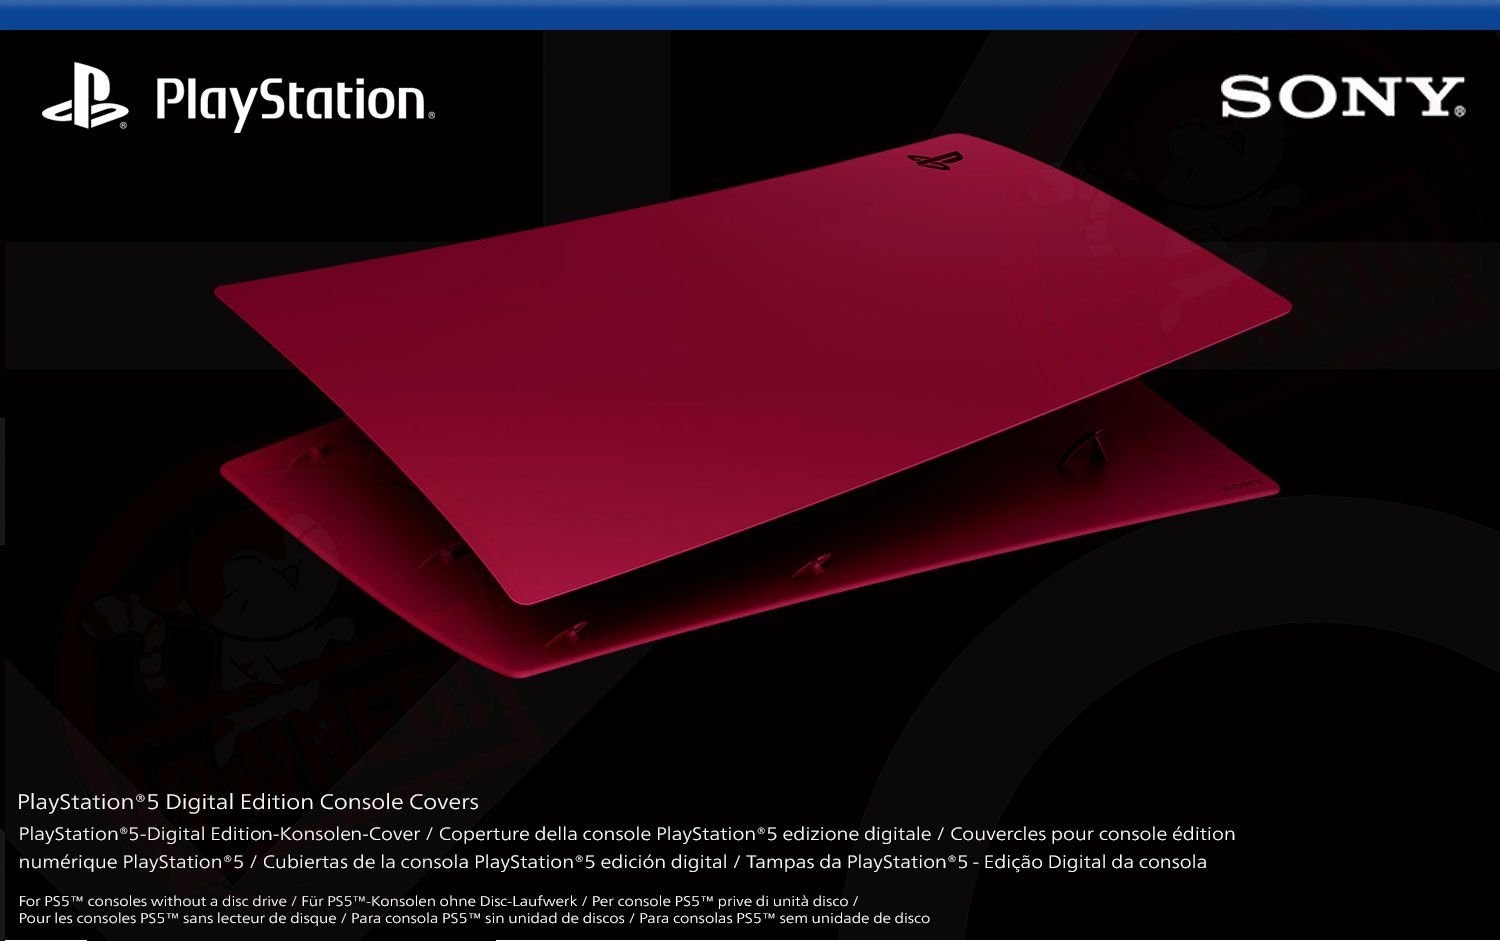 PlayStation 5 Digital Edition Console Cover - Cosmic Red (PS5) | PlayStation 5